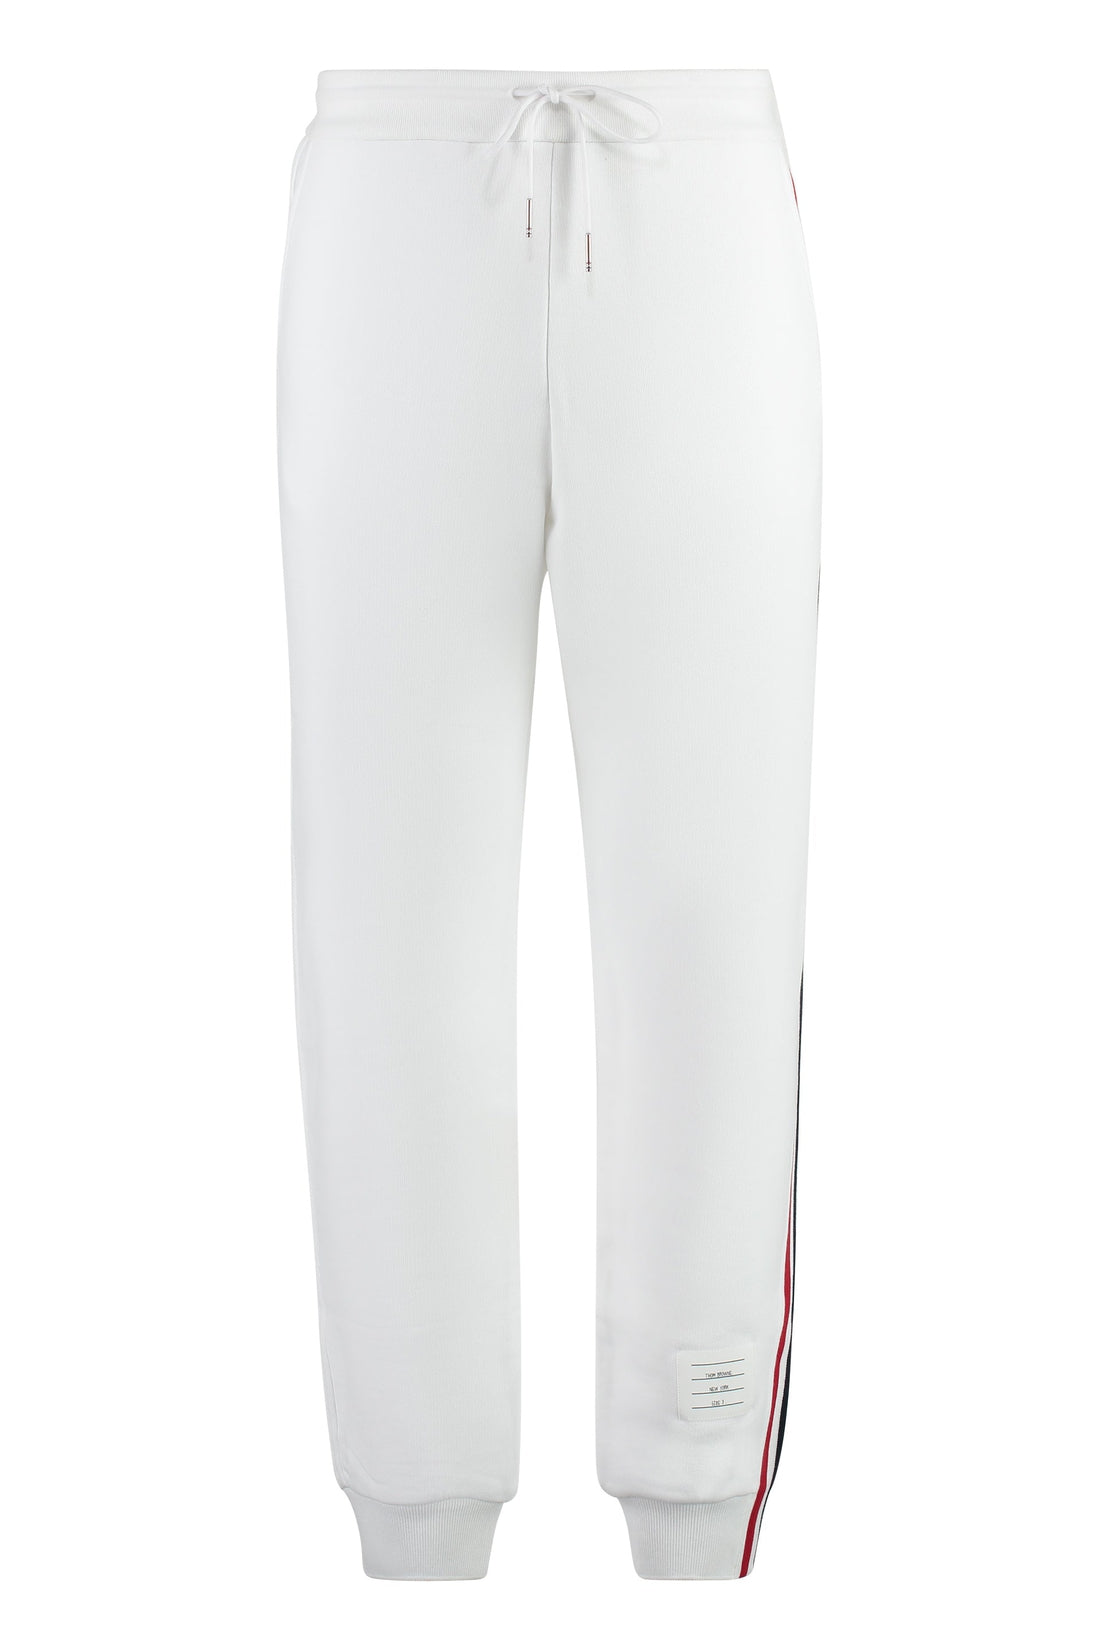 Thom Browne-OUTLET-SALE-Wool track-pants with knitted side stripes-ARCHIVIST